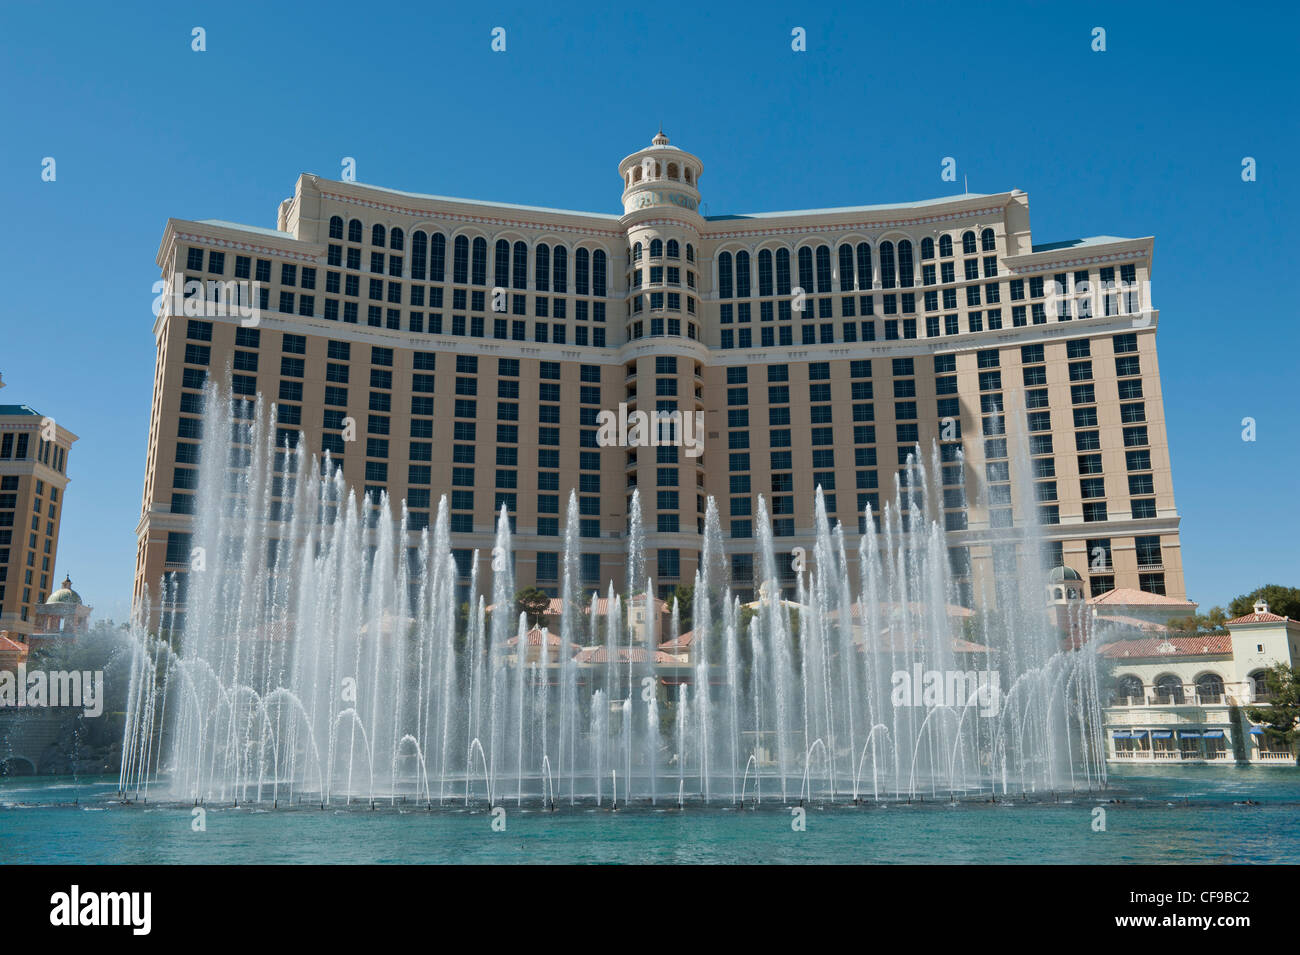 The Spectacular Bellagio Fountains in the Day, Las Vegas, USA Stock Photo